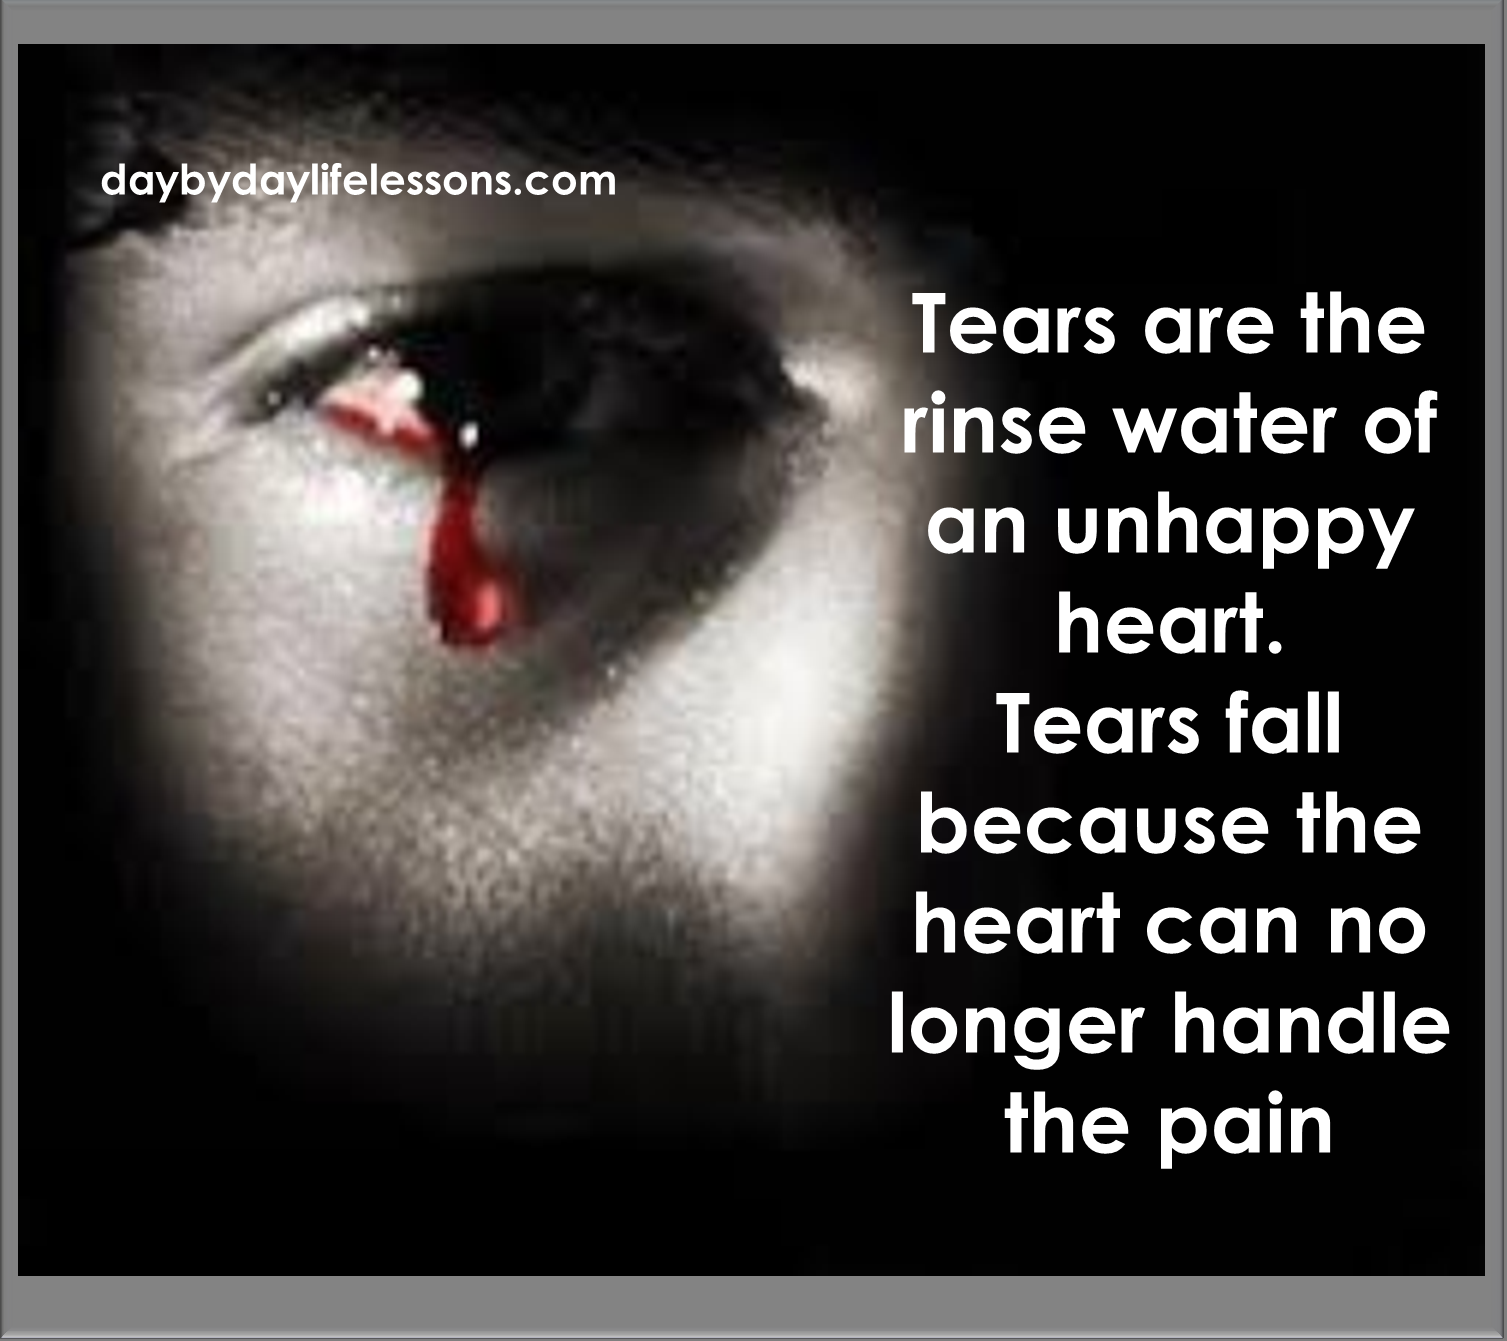 Tears are the rinse water of an unhappy heart ~ Day By Day Life Lessons